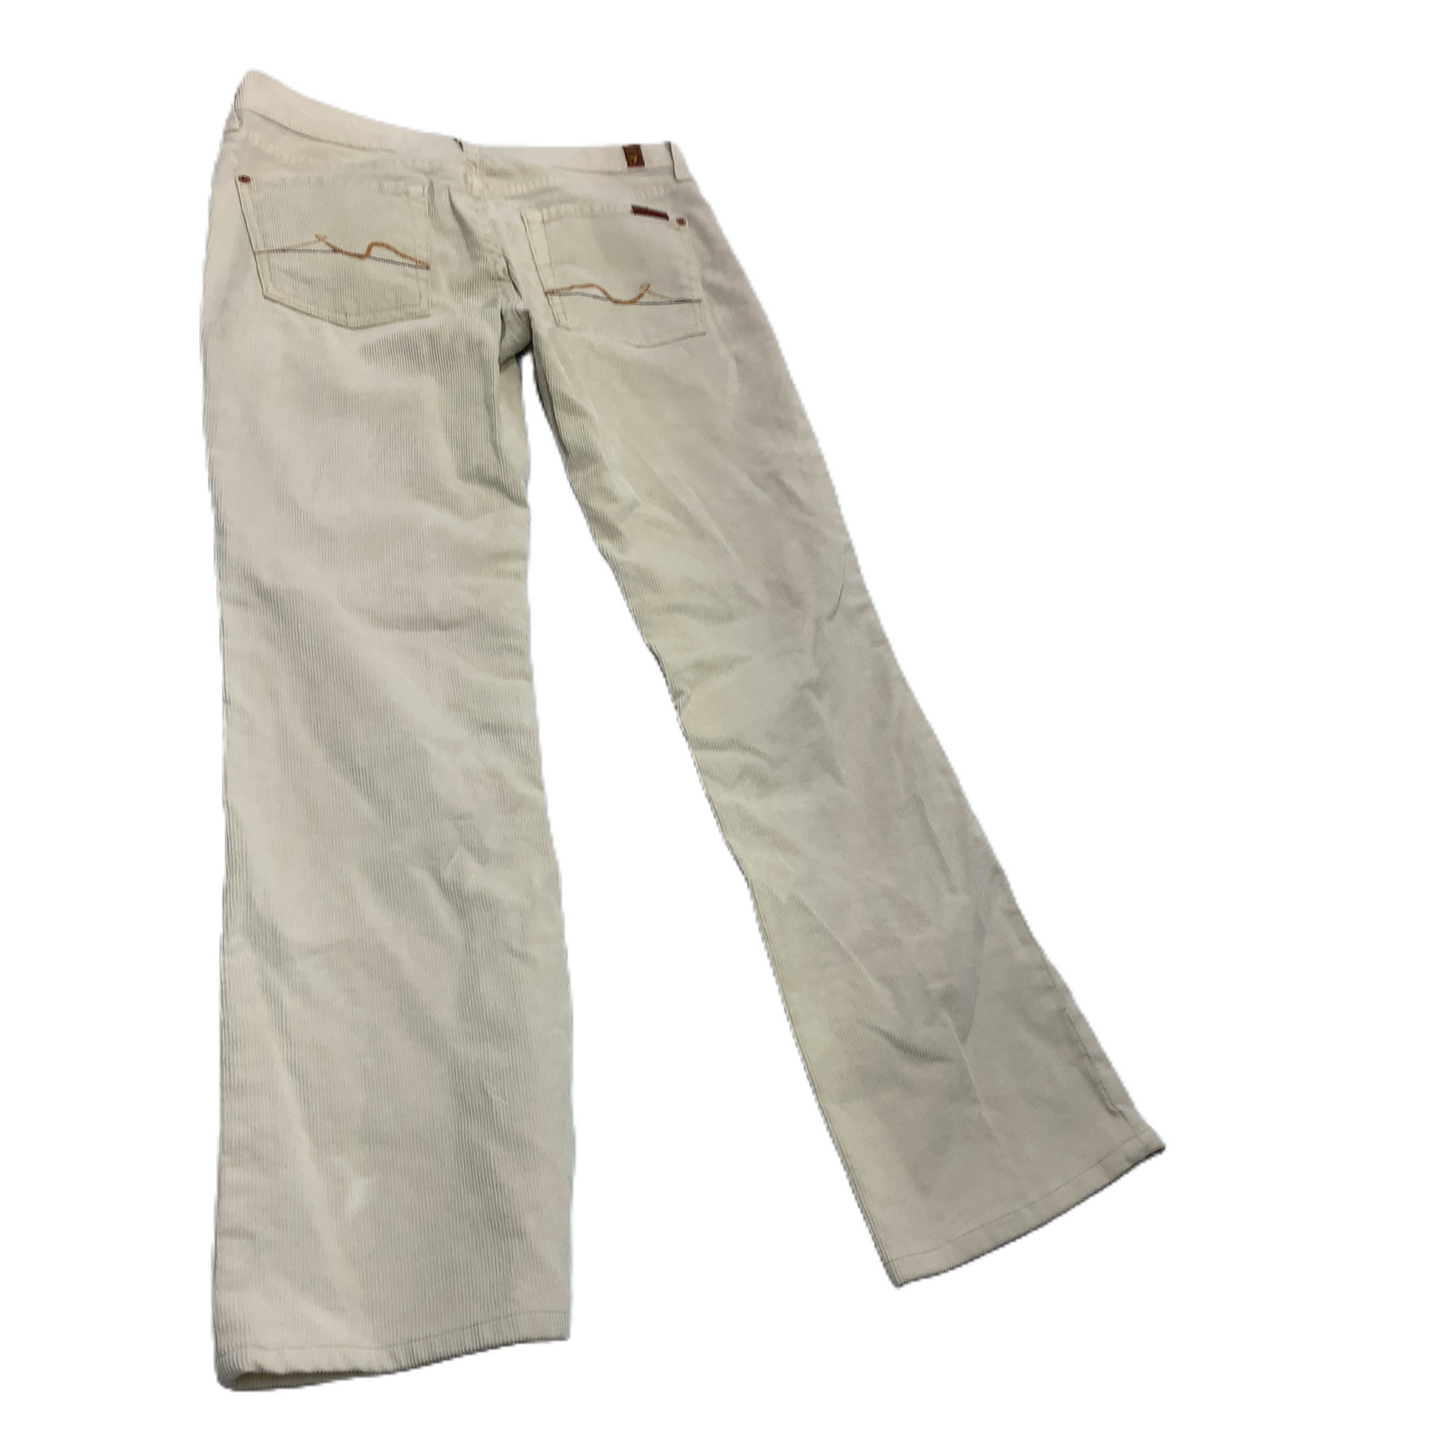 Cream  Pants Designer By 7 For All Mankind  Size: 8